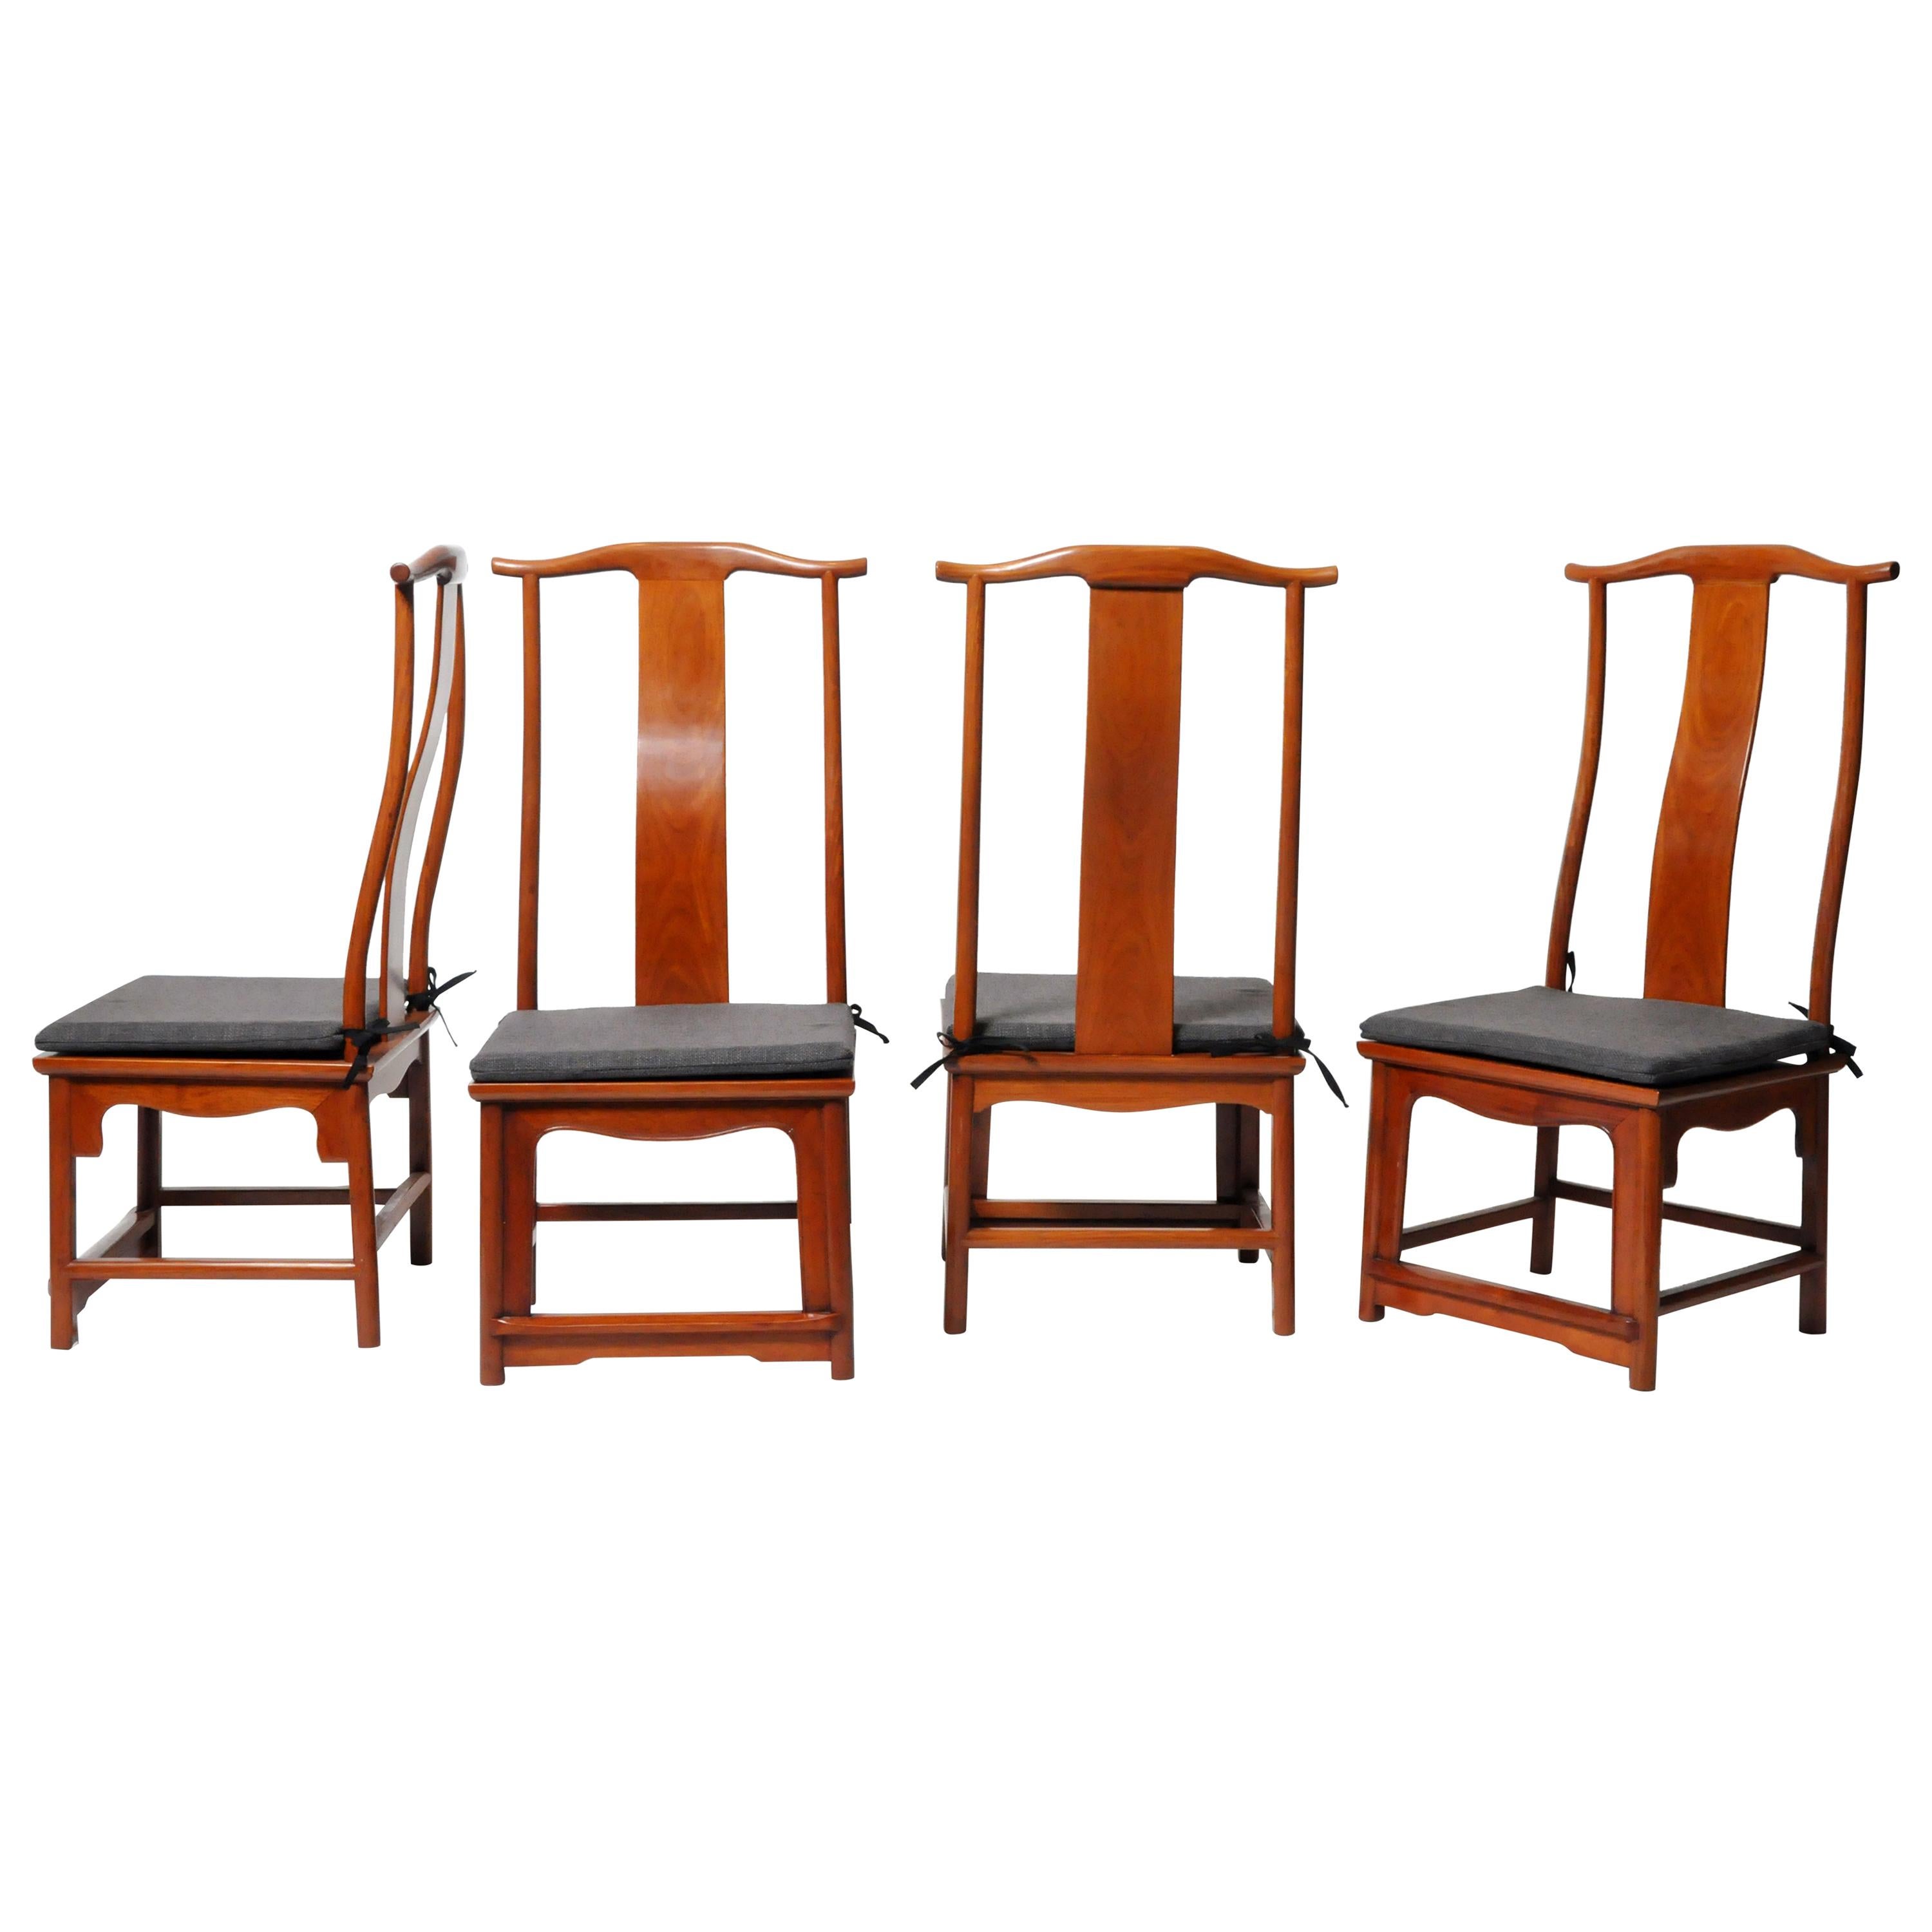 A Set of Four Chinese Dining Chairs For Sale